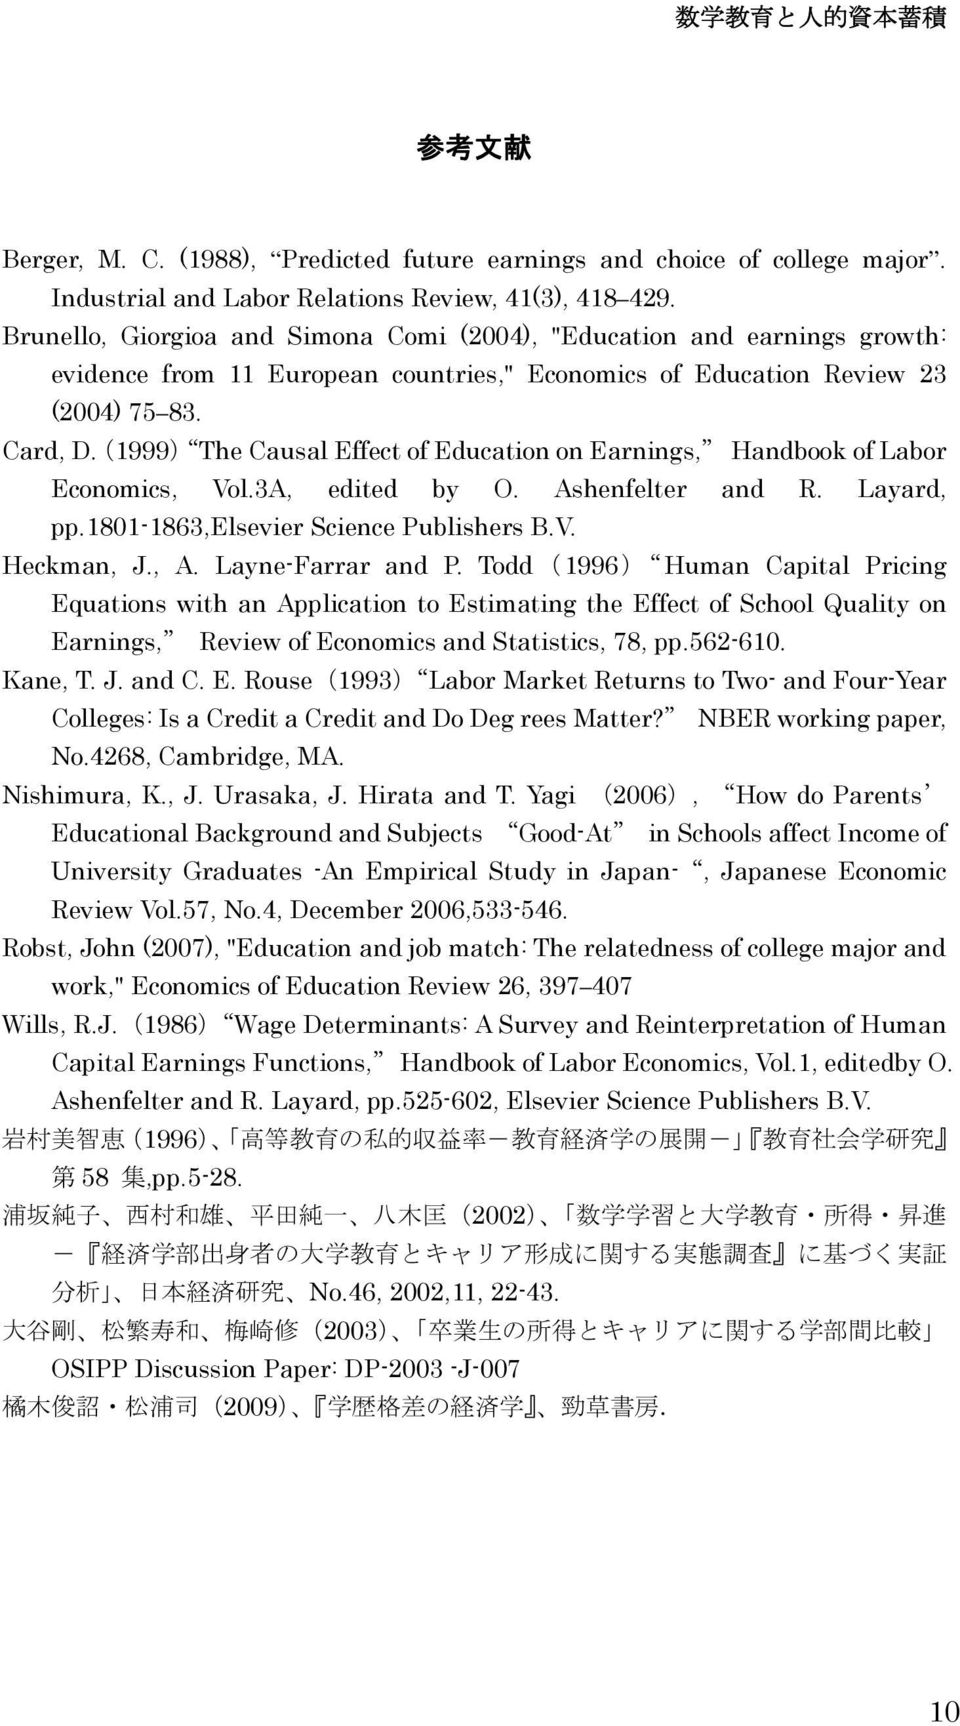 (1999) The Causal Effect of Education on Earnings, Handbook of Labor Economics, Vol.3A, edited by O. Ashenfelter and R. Layard, pp.1801-1863,elsevier Science Publishers B.V. Heckman, J., A.